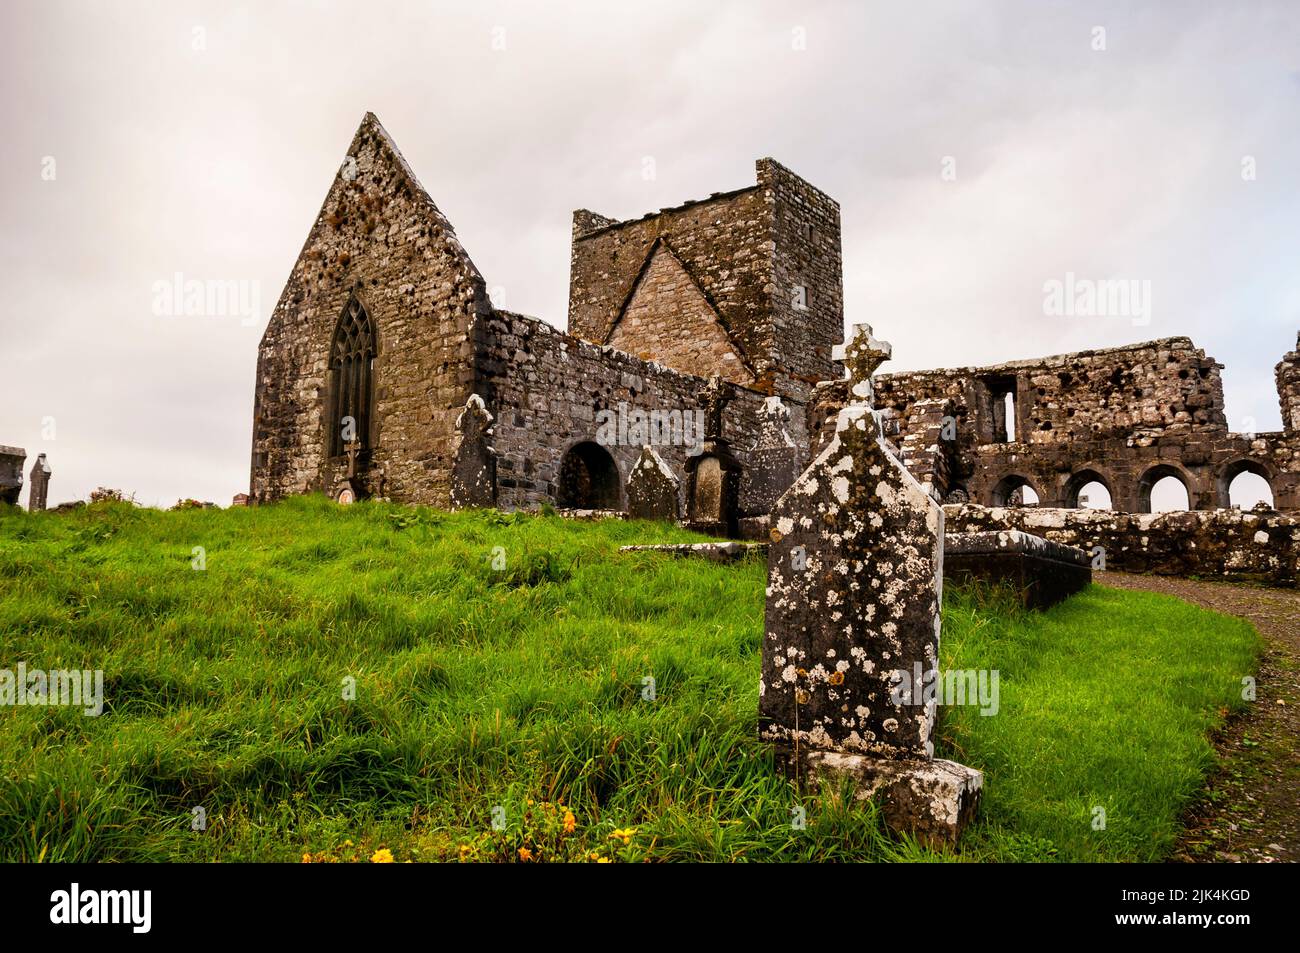 Arched cloistered late gothic architectural ruins of Burrishoole Friary in County Mayo, Ireland. Stock Photo